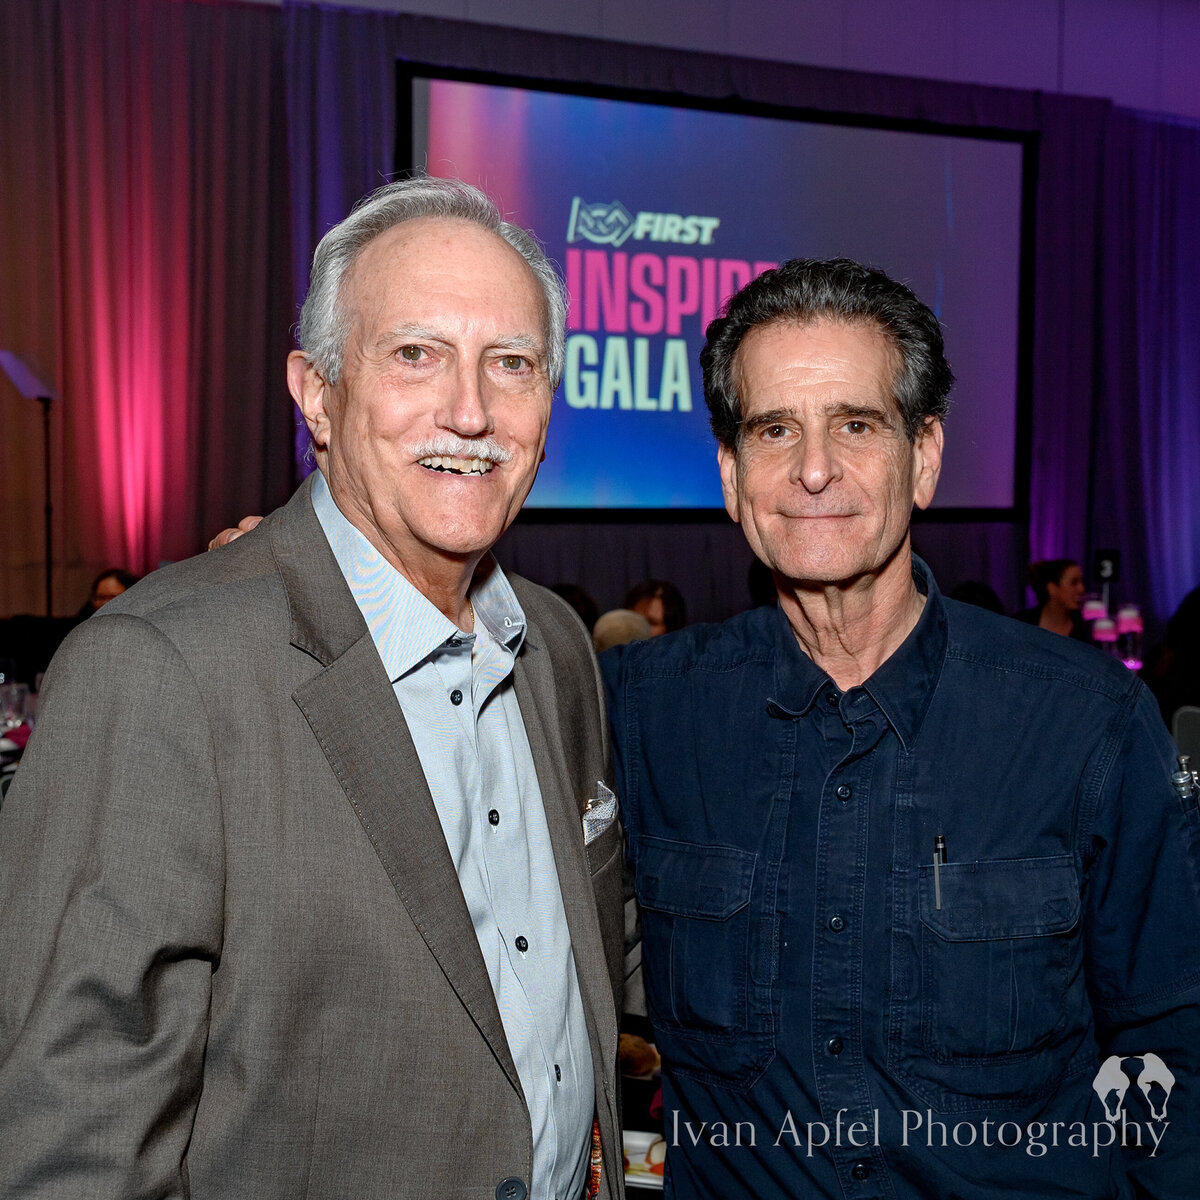 South-Florida-Non-Profit-Photography-FIRST-Inspire-Gala-04